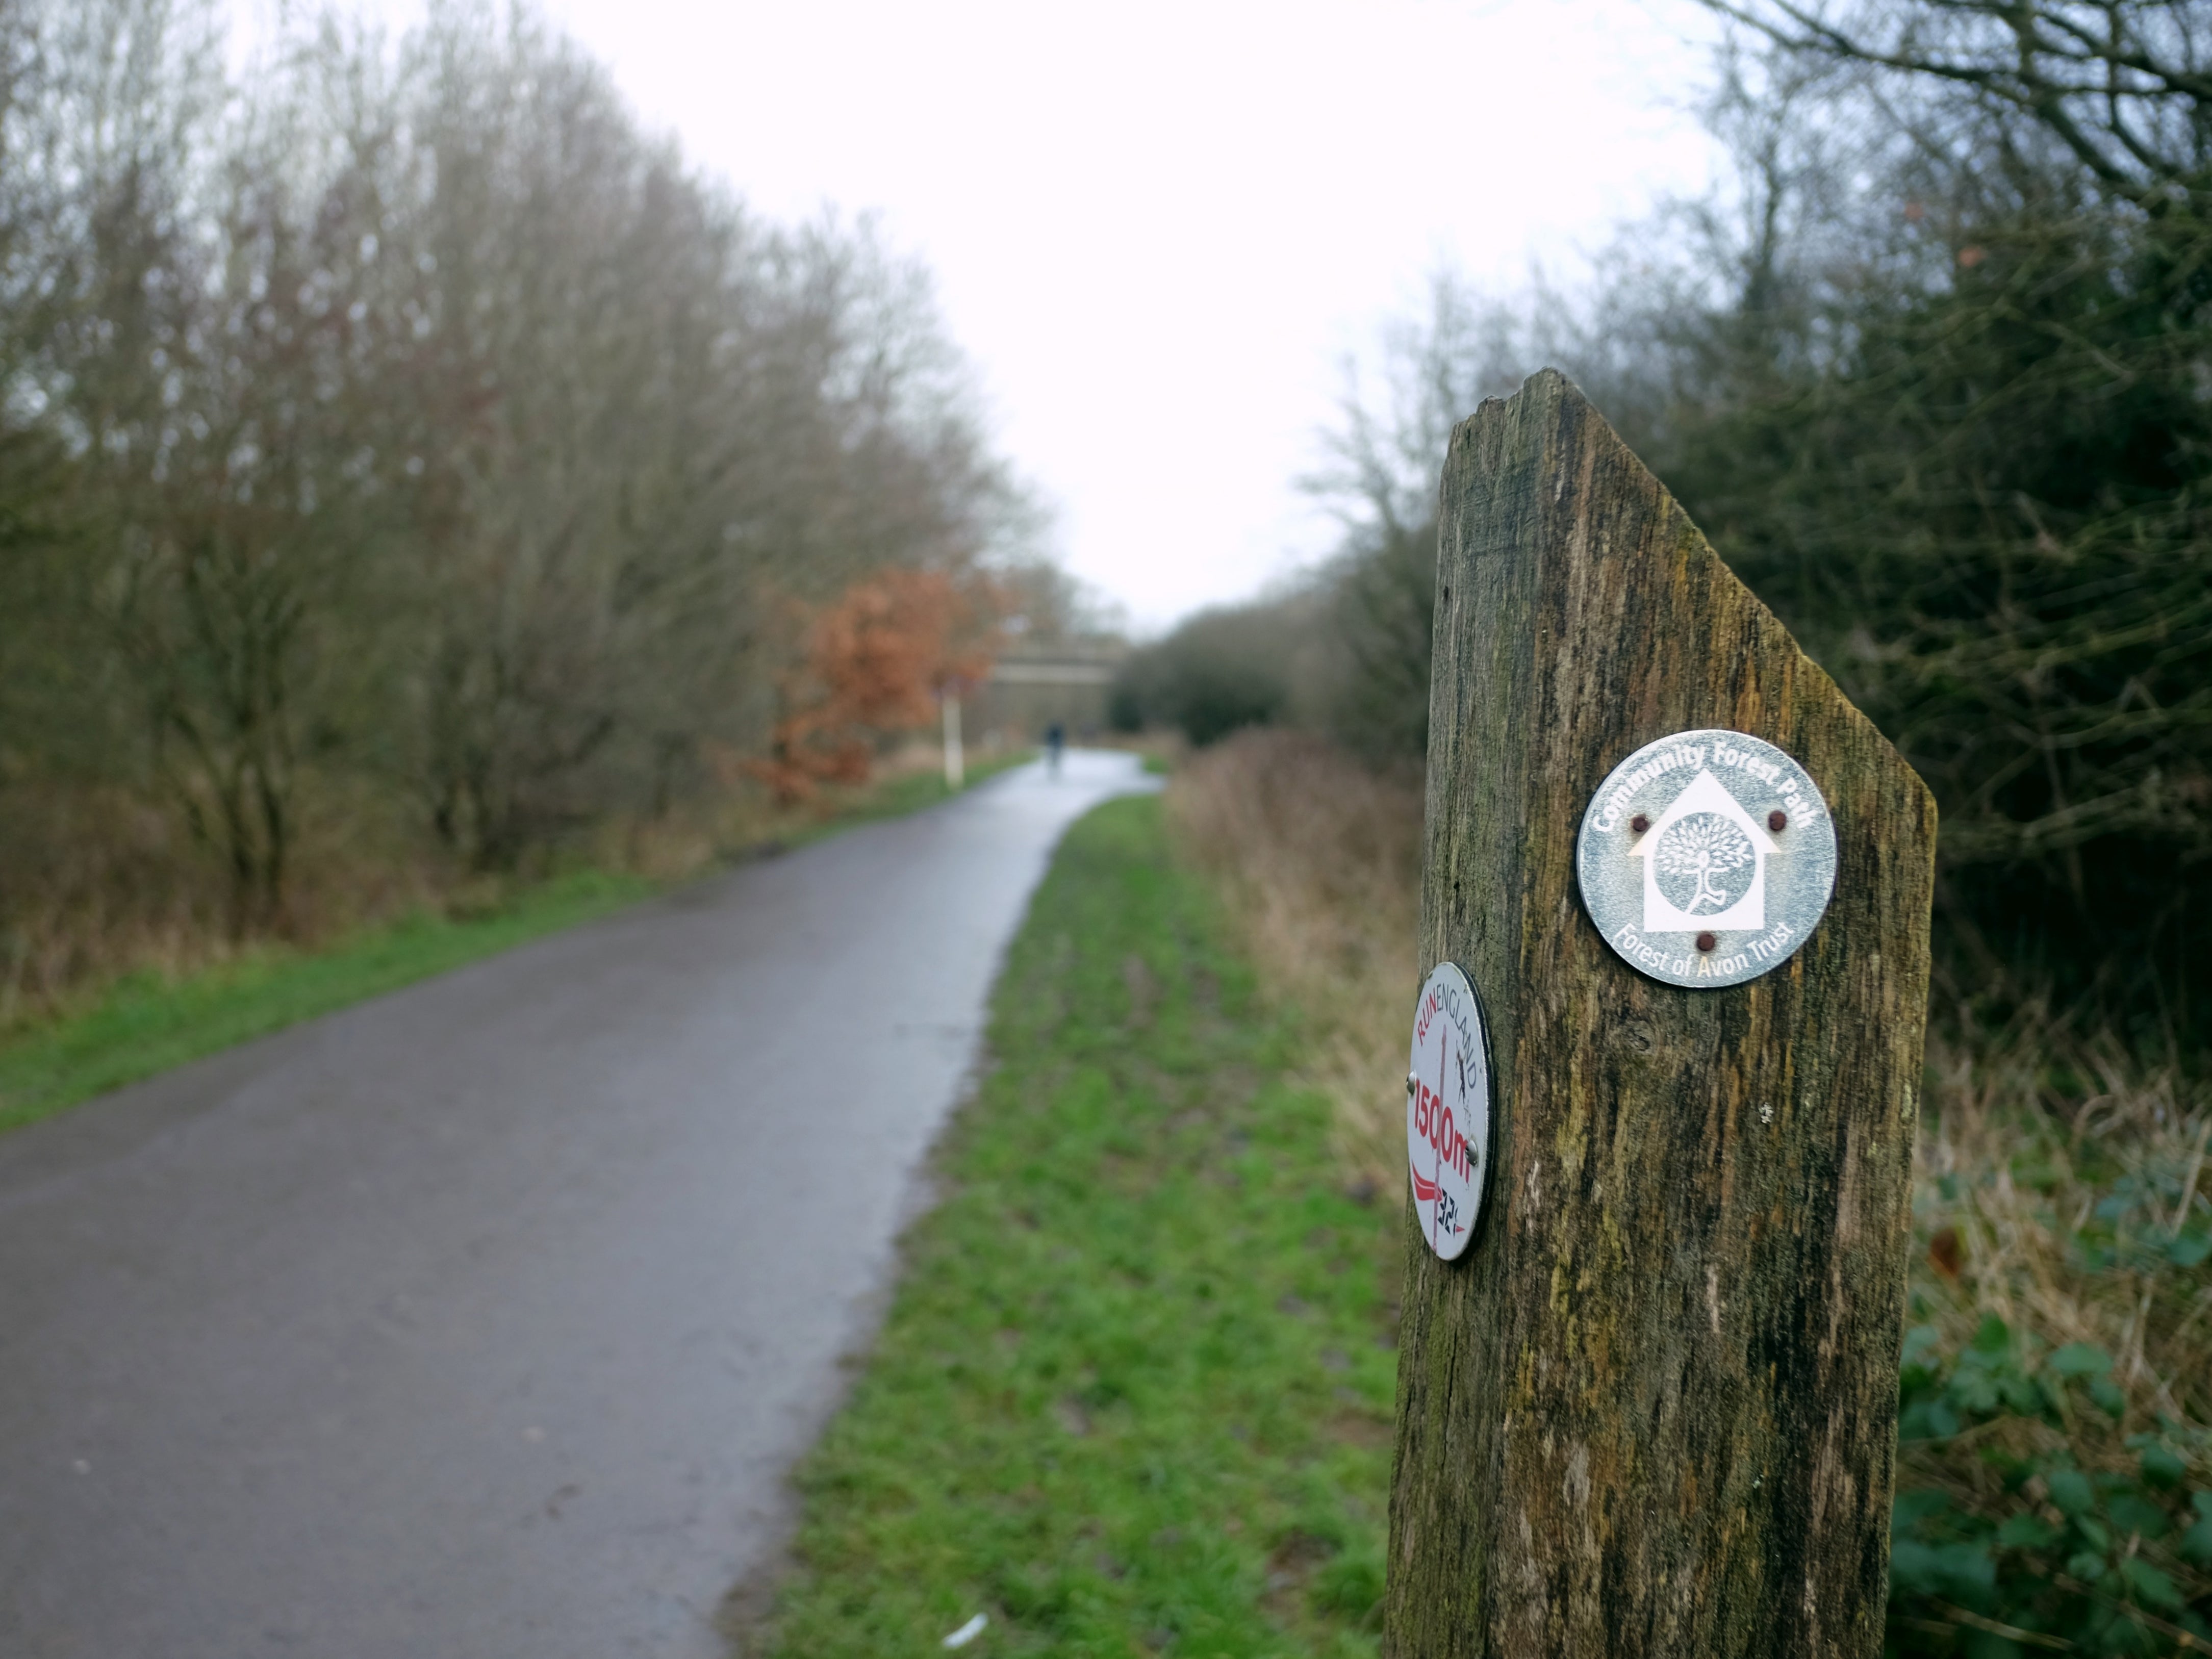 The Community Forest Path covers 46 miles in the south west